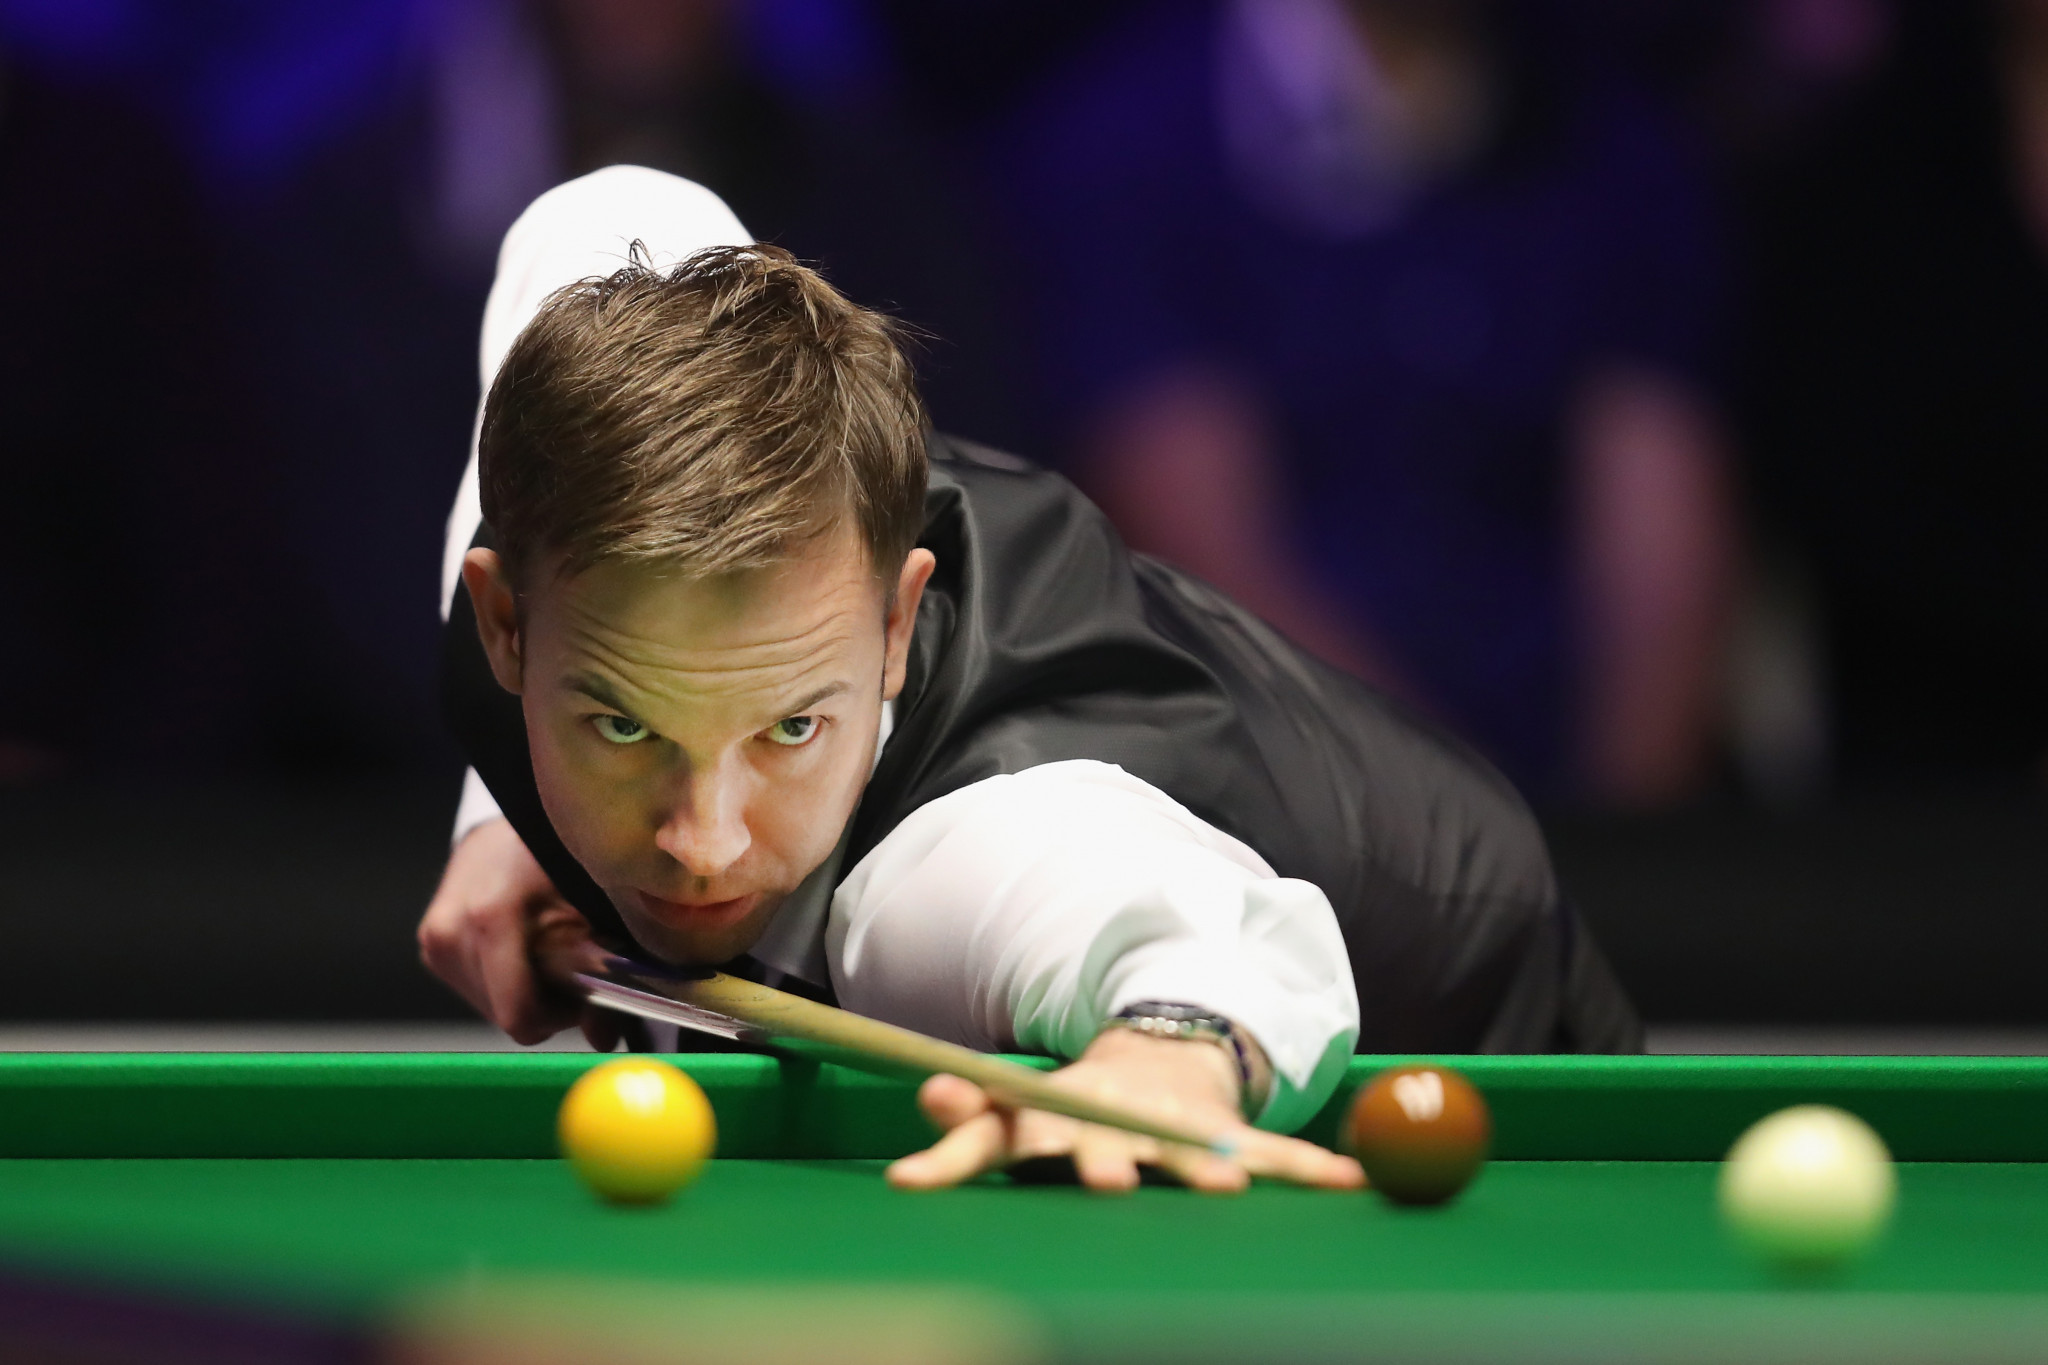 Carter leads O'Sullivan in second round of World Snooker Championships